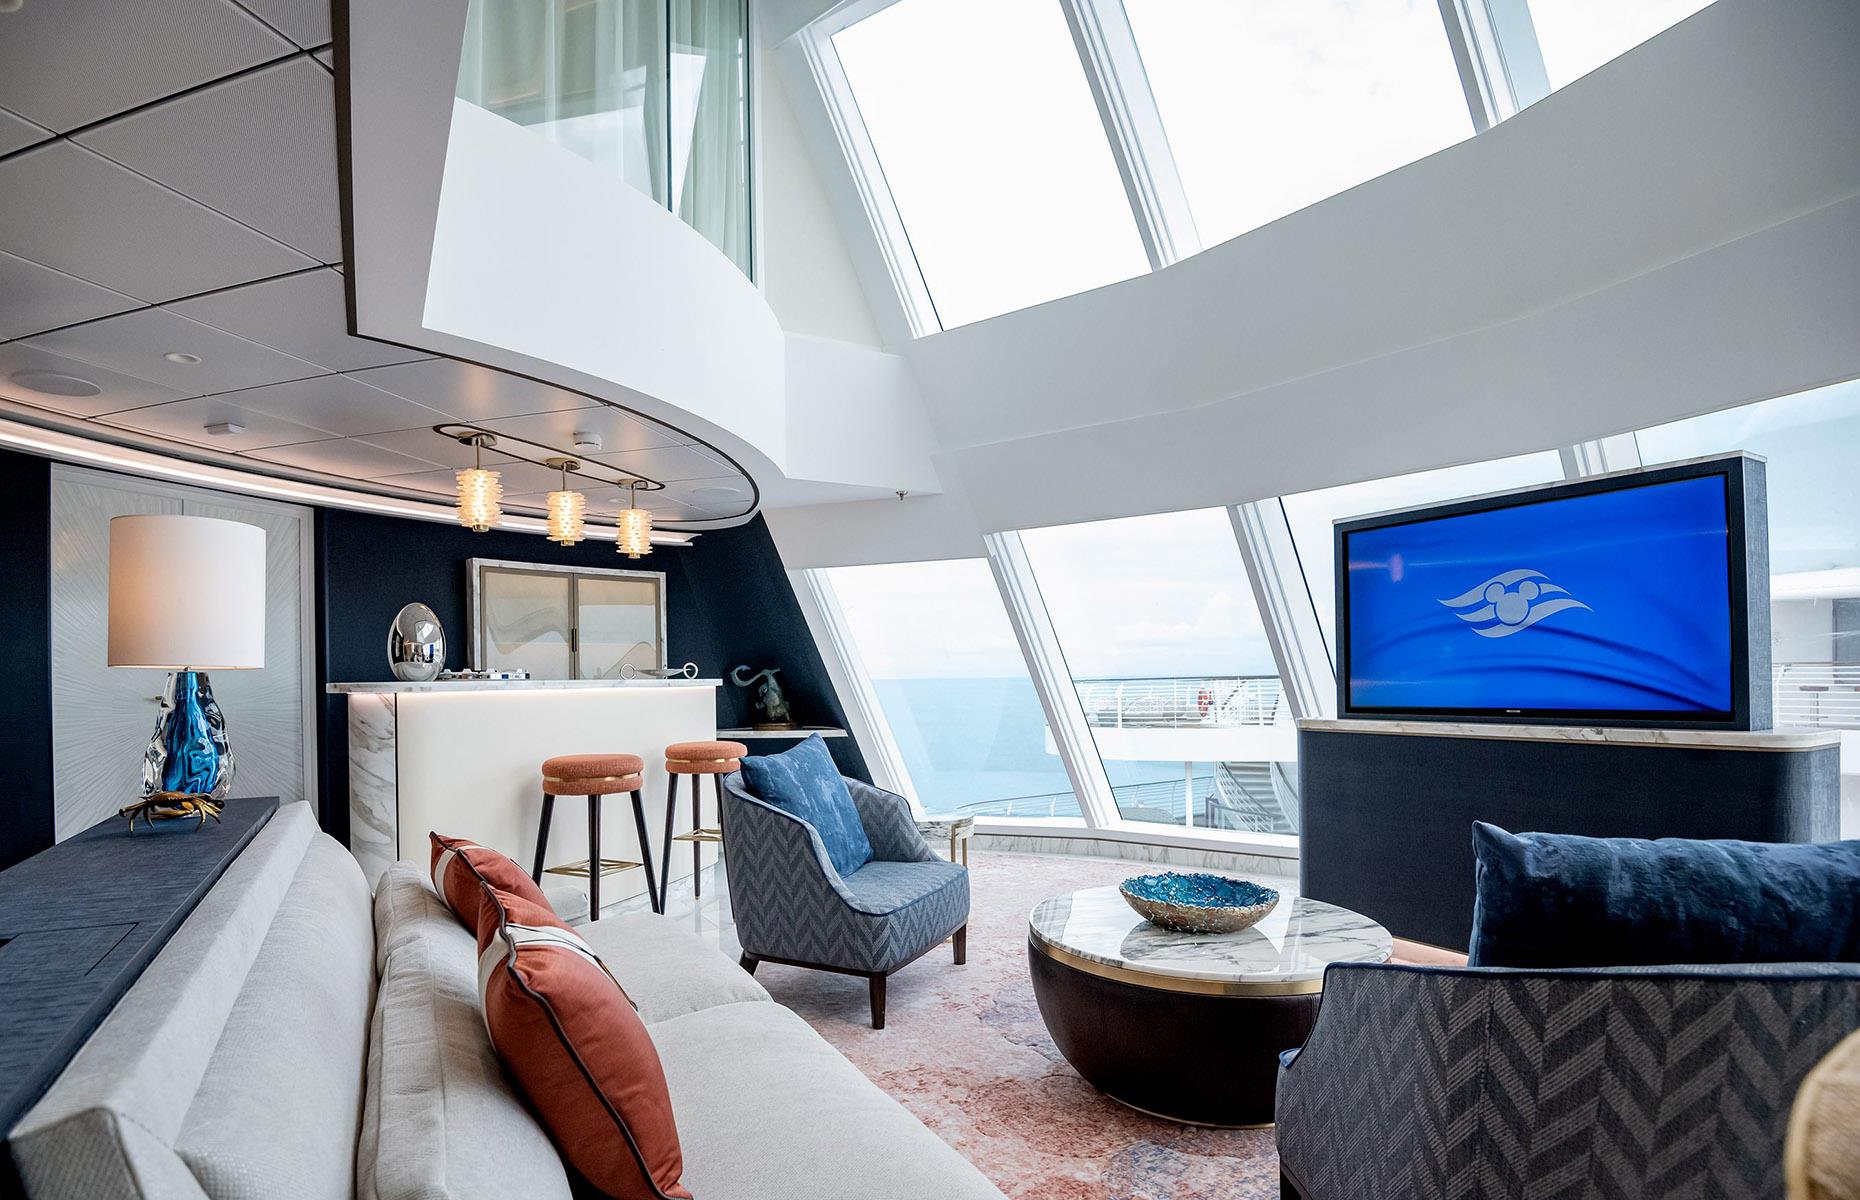 <p>Perched in the funnel of the ship, high above the upper decks, the Tower Suite is accessed by its own private elevator. Inside, the two-story living room features a chandelier, floor-to-ceiling glass windows and decor subtly inspired by the Disney movie <em>Moana</em>. A grand spiral staircase connects the palatial living area, which includes a dining salon and wet bar, to the suite's four bedrooms. Added perks include a concierge who handles your priority reservations, and access to a VIP lounge and sun deck.</p>